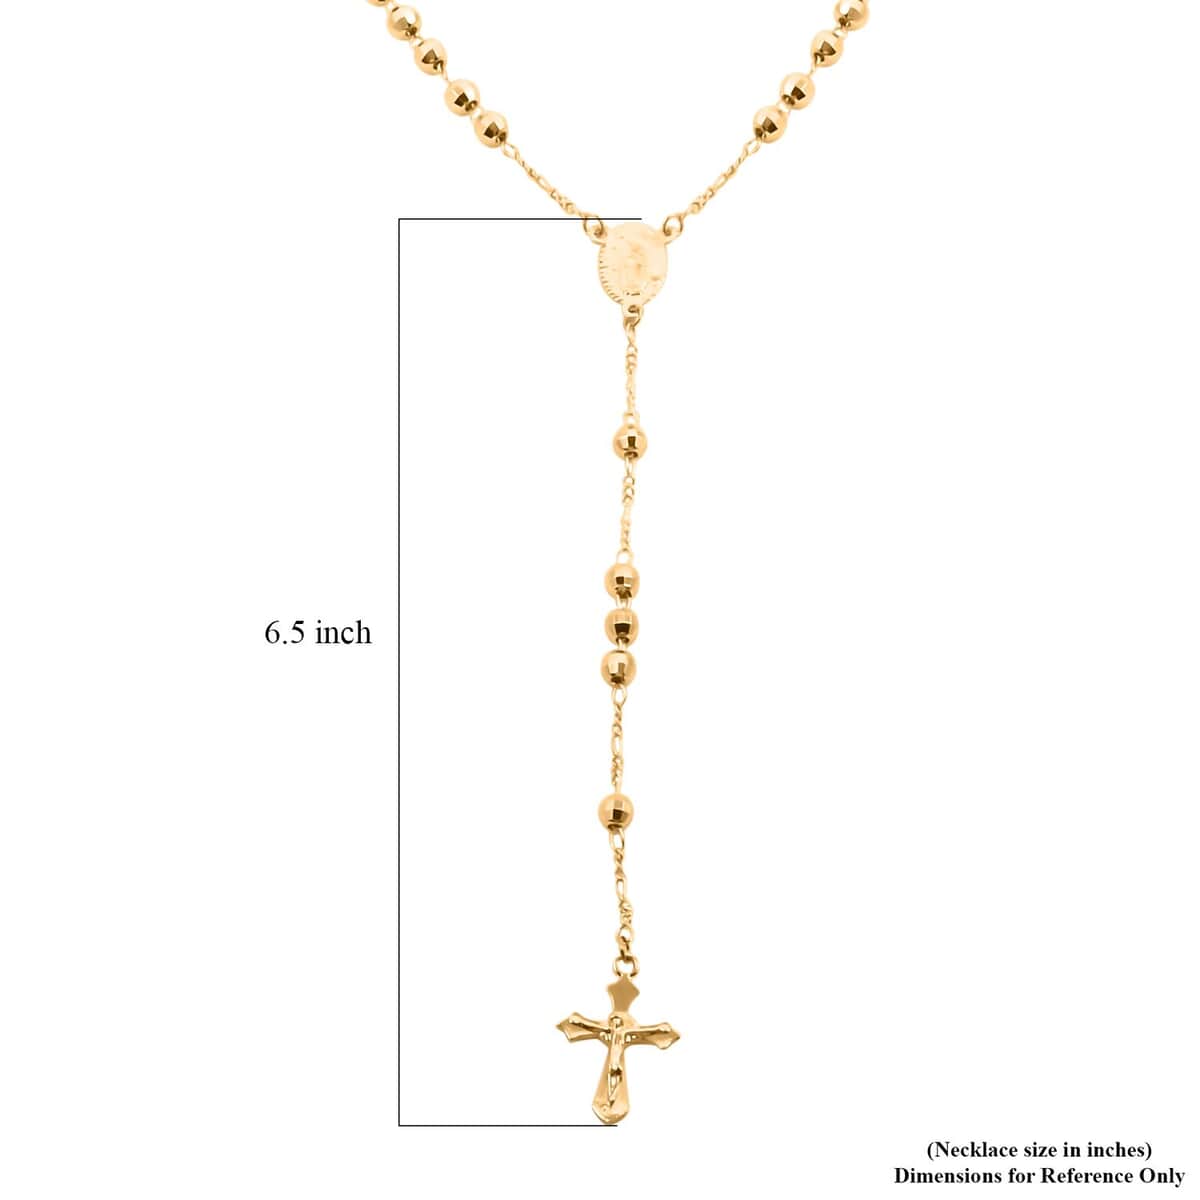 Diamond-Cut Beaded Necklace 21 Inches in Goldtone image number 4